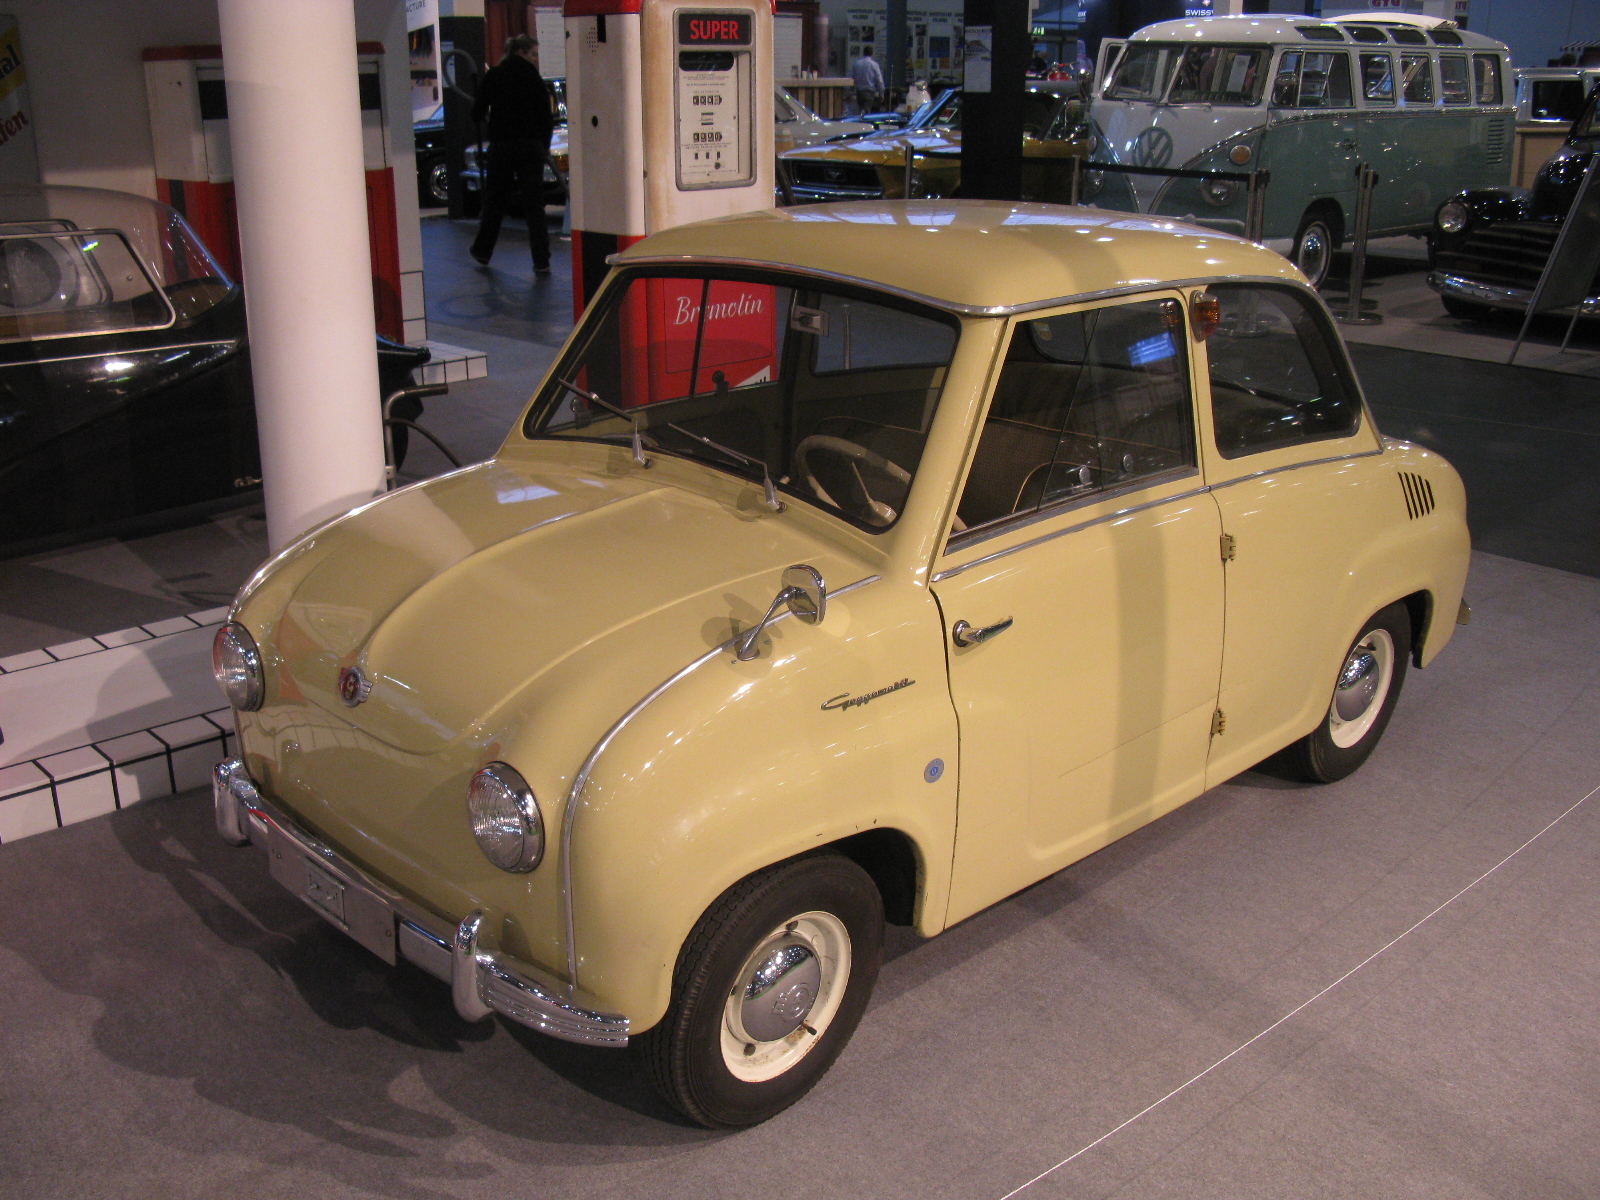 an old yellow car in a museum with other cars